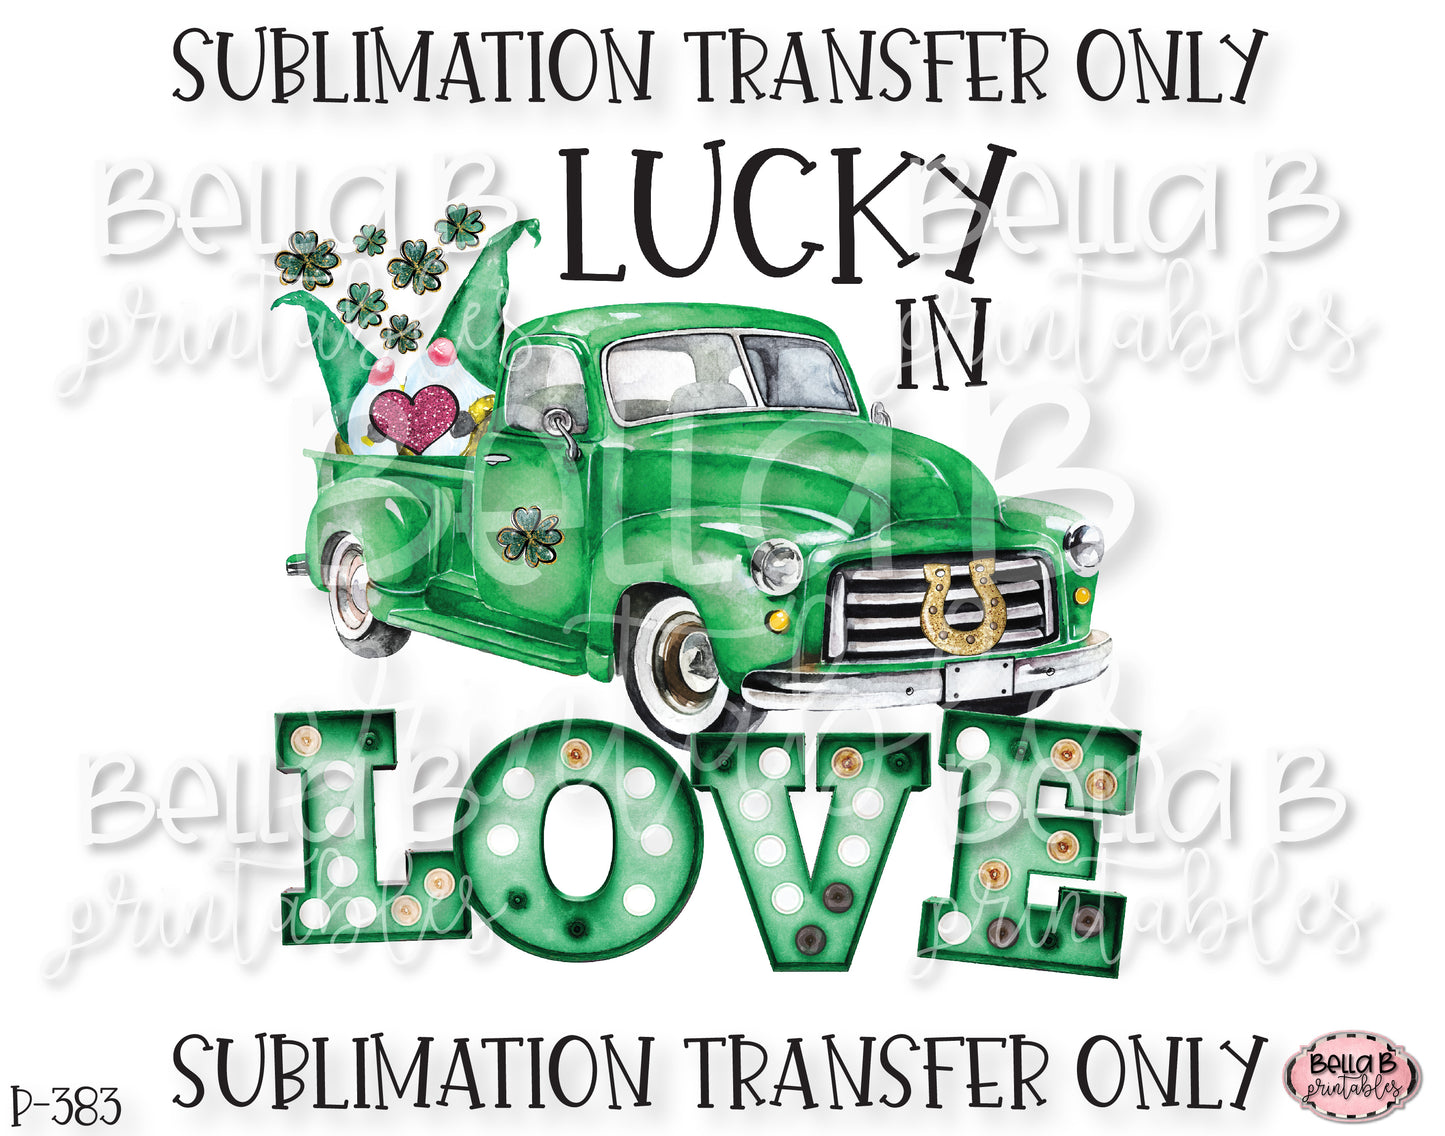 Lucky In Love Sublimation Transfer, Ready To Press, Heat Press Transfer, Sublimation Print